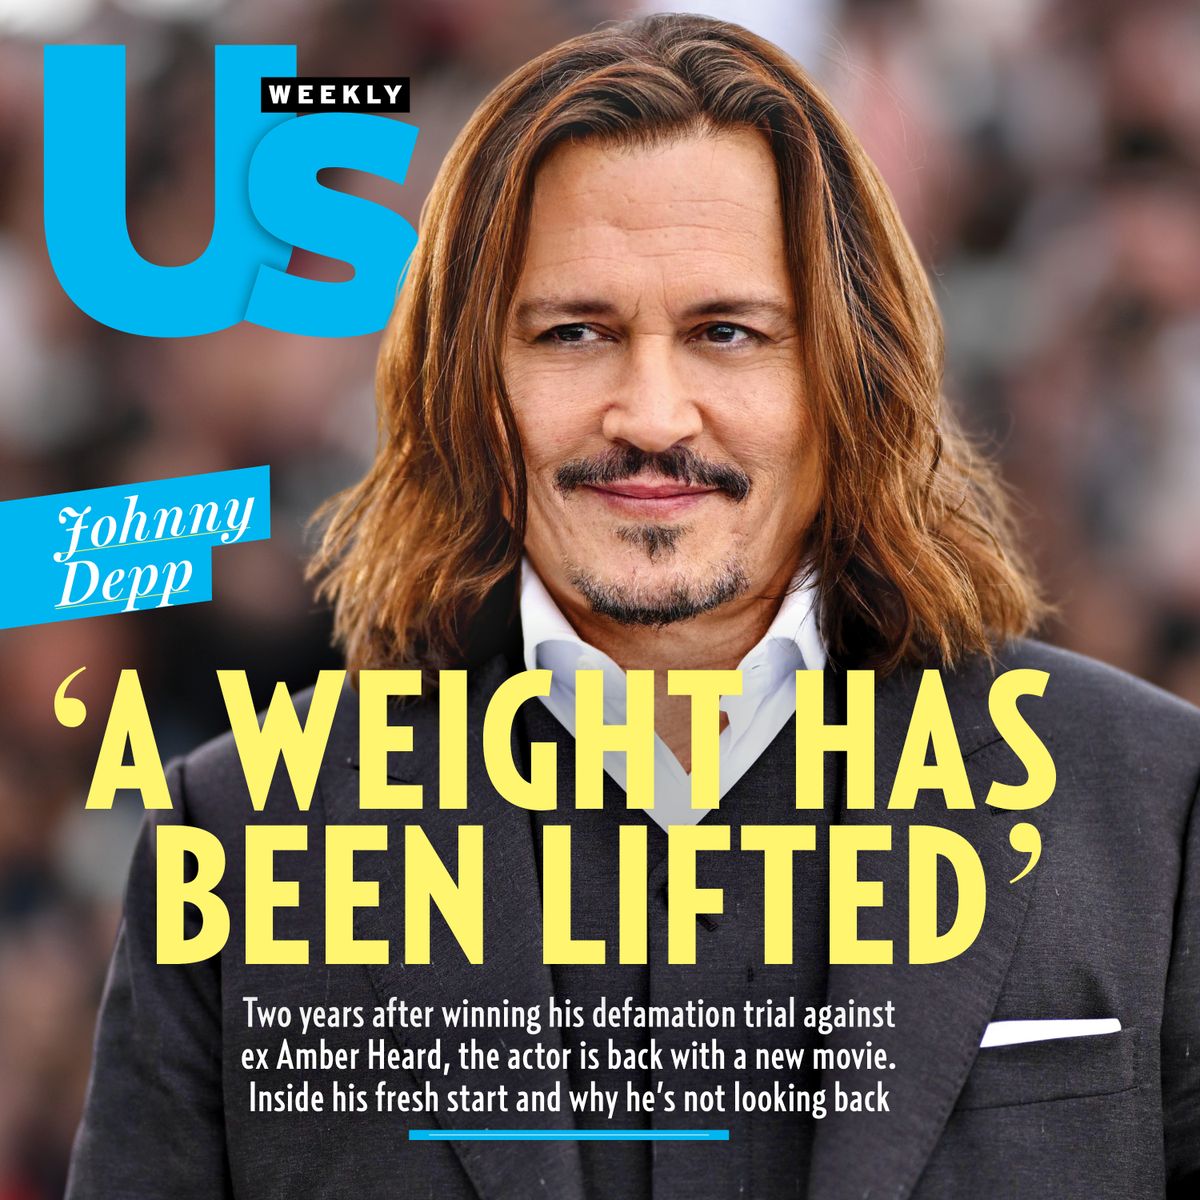 #JeanneduBarry, Johnny Depp’s new film, marks his first feature film since his high-profile 2022 defamation trial. In our cover story, insiders exclusively reveal how he has moved forward — and where his career may go next: bit.ly/3UYIpva